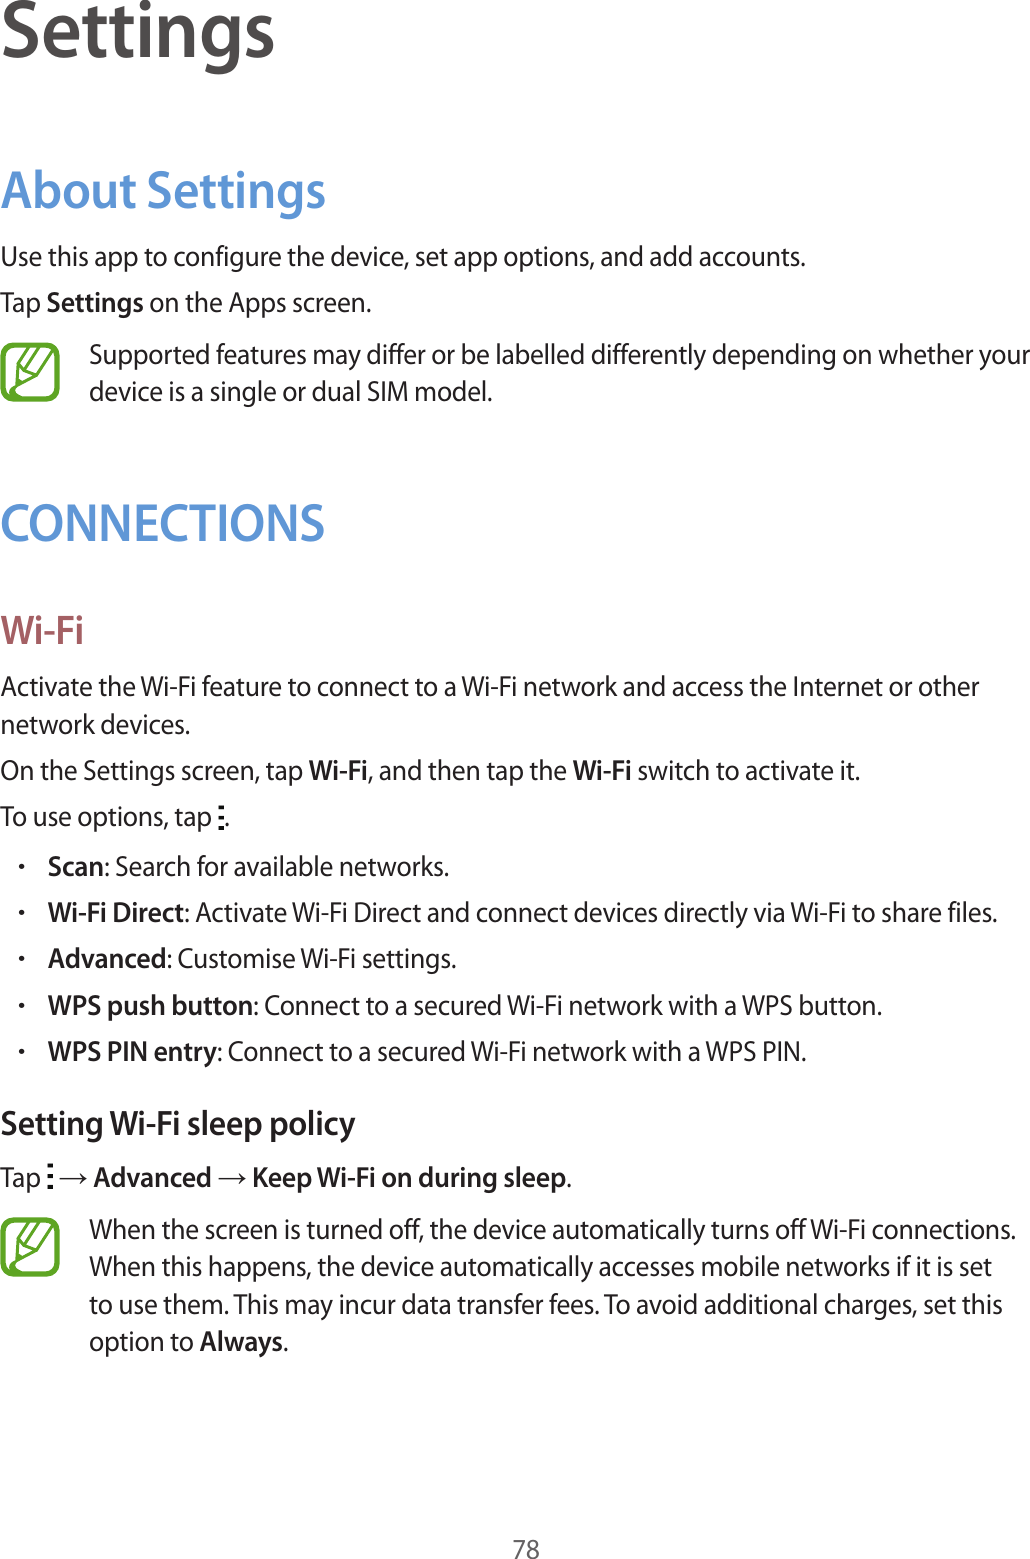 78SettingsAbout SettingsUse this app to configure the device, set app options, and add accounts.Tap Settings on the Apps screen.Supported features may differ or be labelled differently depending on whether your device is a single or dual SIM model.CONNECTIONSWi-FiActivate the Wi-Fi feature to connect to a Wi-Fi network and access the Internet or other network devices.On the Settings screen, tap Wi-Fi, and then tap the Wi-Fi switch to activate it.To use options, tap  .•Scan: Search for available networks.•Wi-Fi Direct: Activate Wi-Fi Direct and connect devices directly via Wi-Fi to share files.•Advanced: Customise Wi-Fi settings.•WPS push button: Connect to a secured Wi-Fi network with a WPS button.•WPS PIN entry: Connect to a secured Wi-Fi network with a WPS PIN.Setting Wi-Fi sleep policyTap   → Advanced → Keep Wi-Fi on during sleep.When the screen is turned off, the device automatically turns off Wi-Fi connections. When this happens, the device automatically accesses mobile networks if it is set to use them. This may incur data transfer fees. To avoid additional charges, set this option to Always.